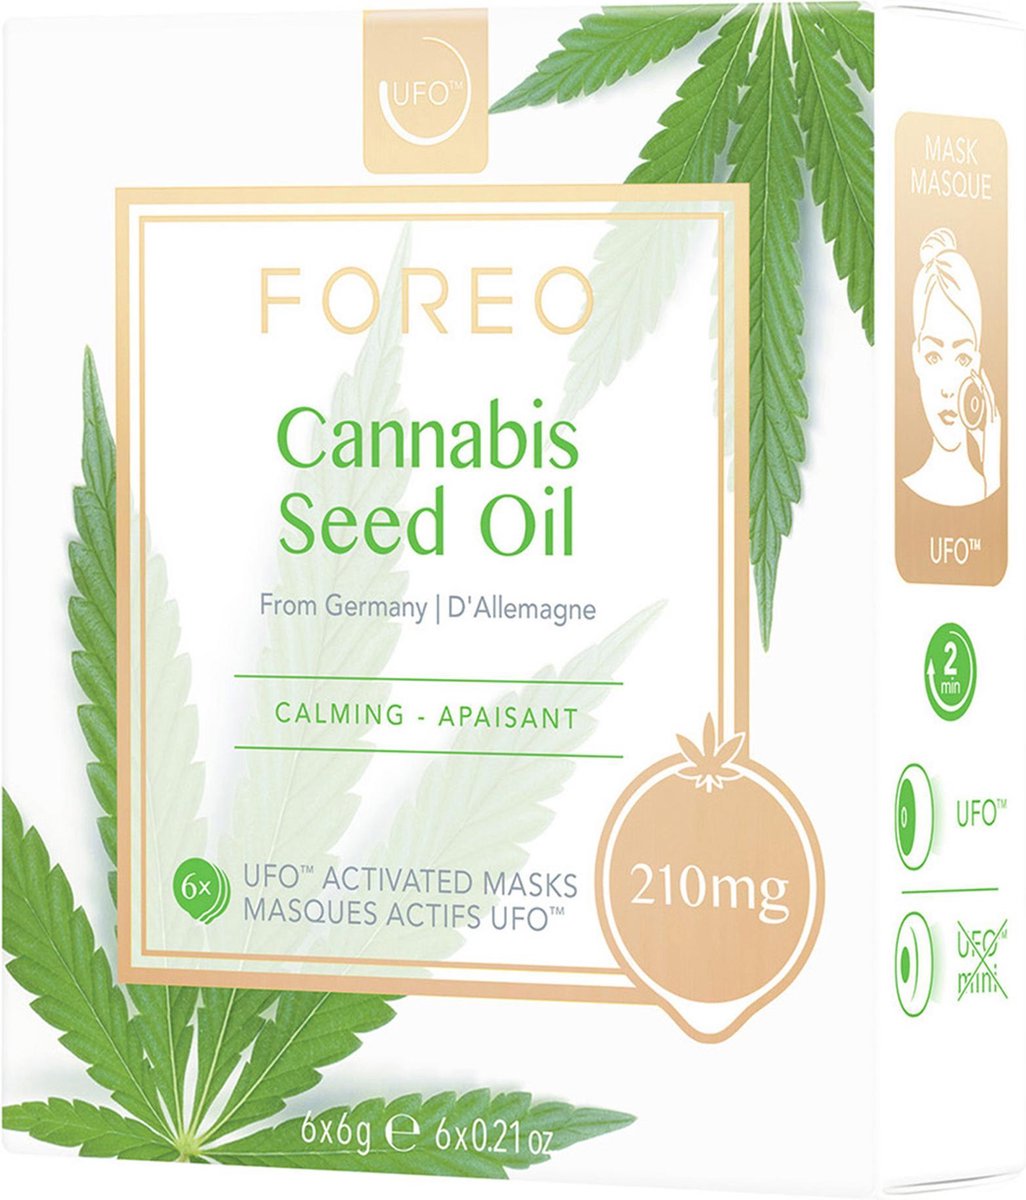 FOREO – Cannabis Seed Oil Facial Mask for UFO™ - FOREO